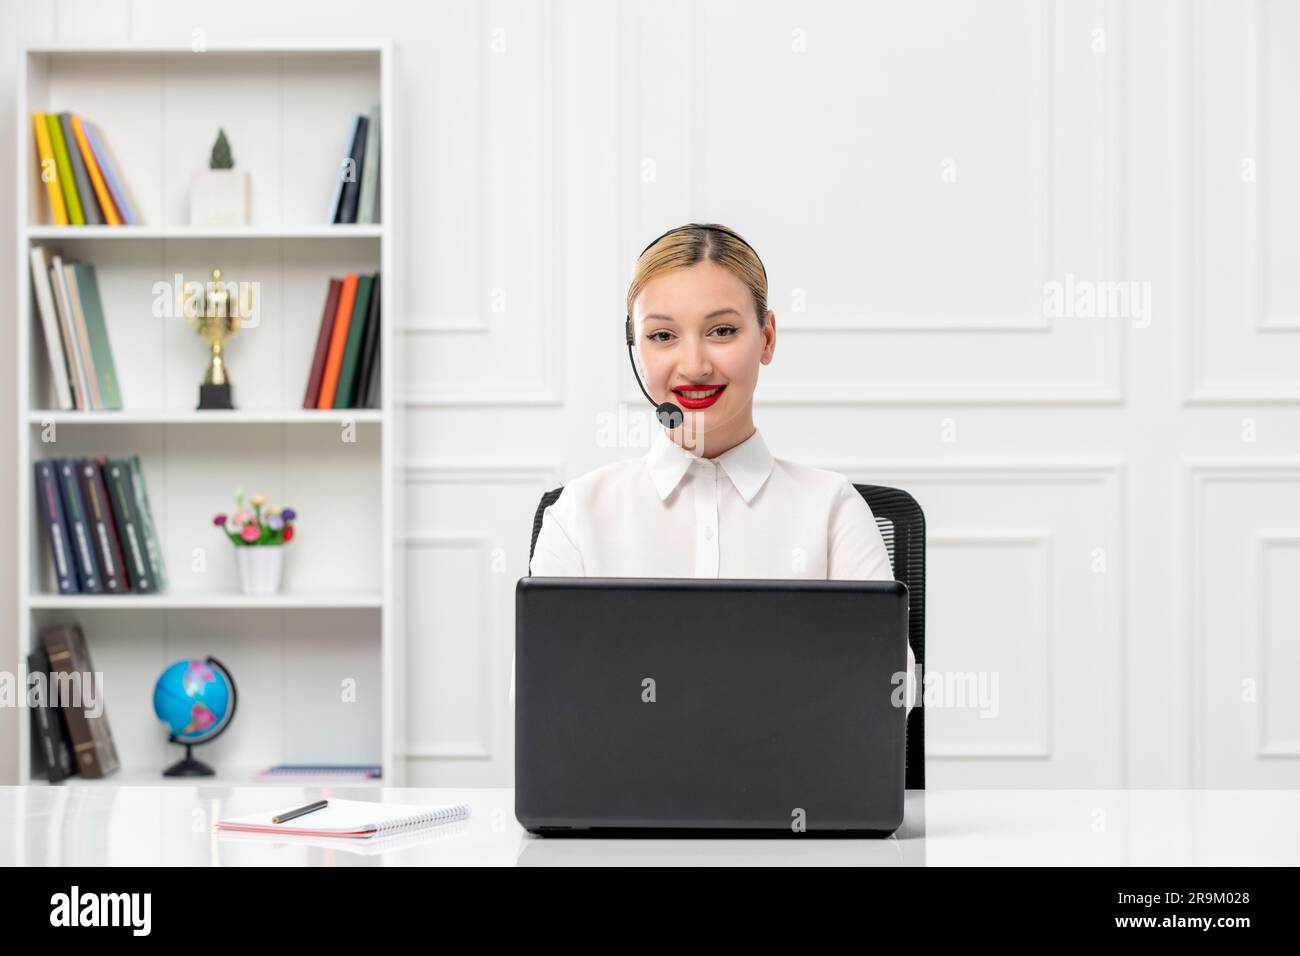 customer service cute woman in white shirt with headset and computer smiling with red lipstick Stock Photo